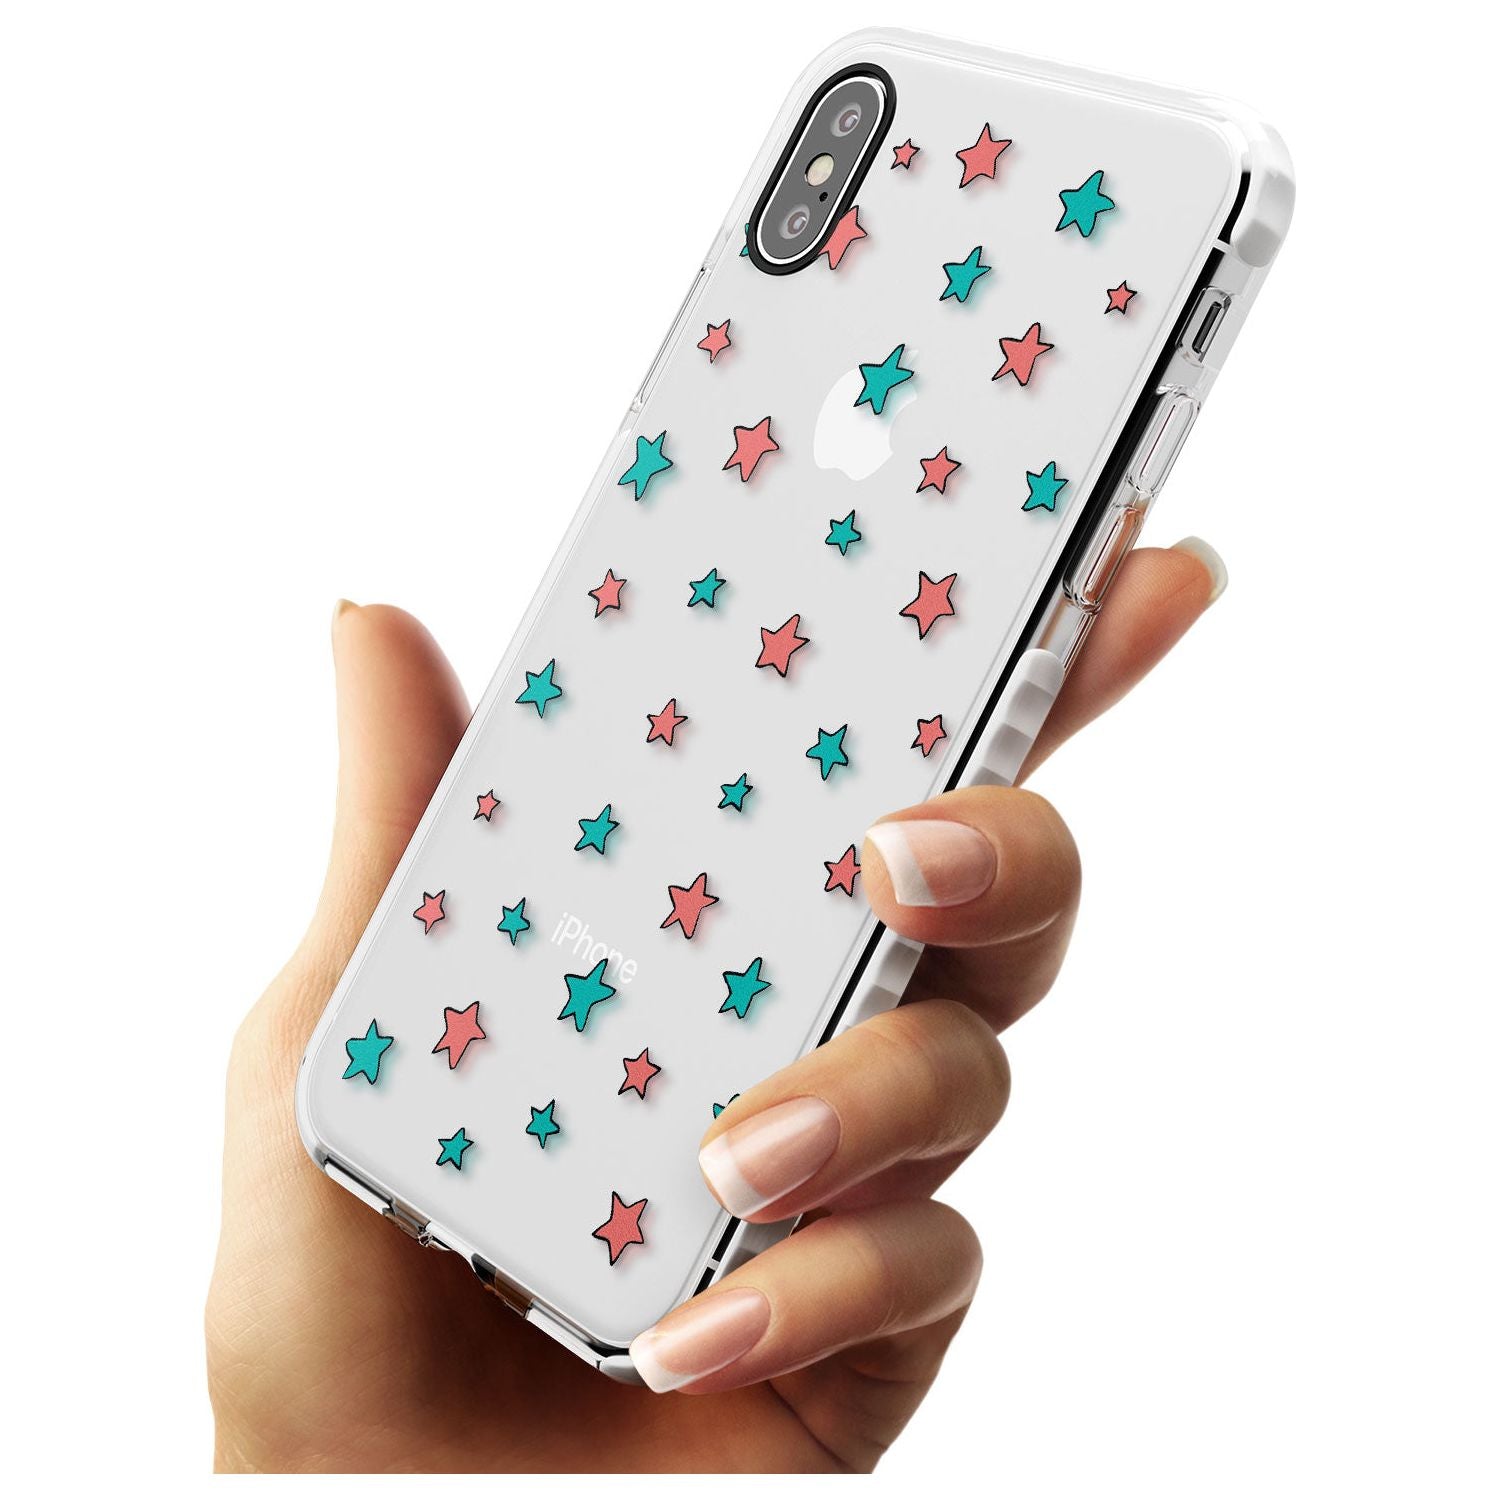 Heartstopper Stars Pattern Impact Phone Case for iPhone X XS Max XR